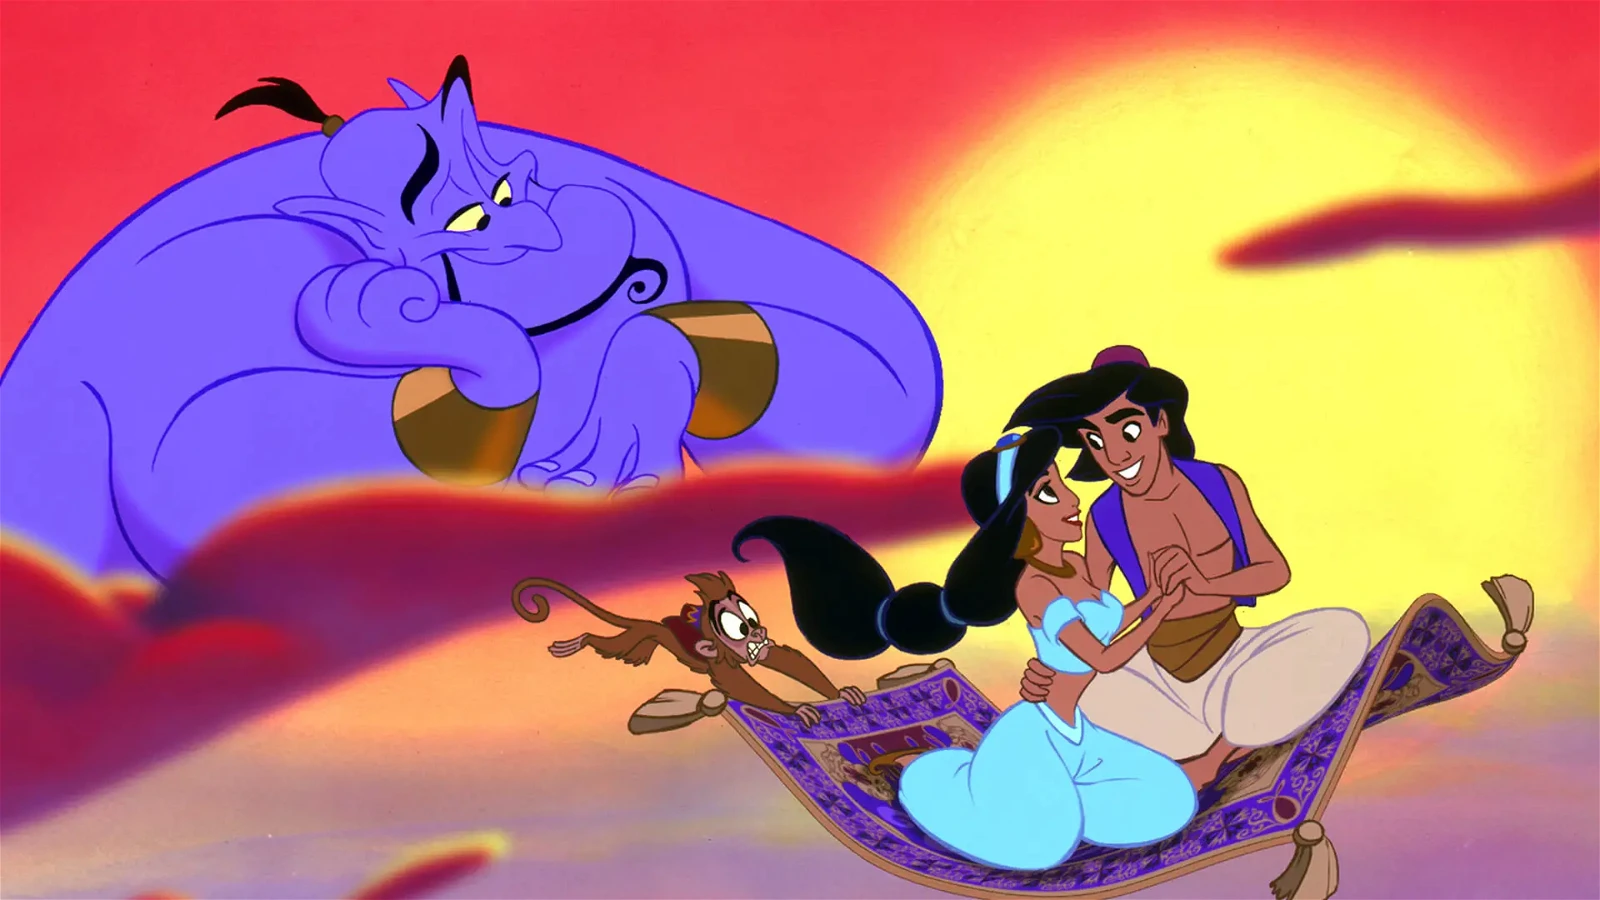 Aladdin is one of the most popular Disney classic